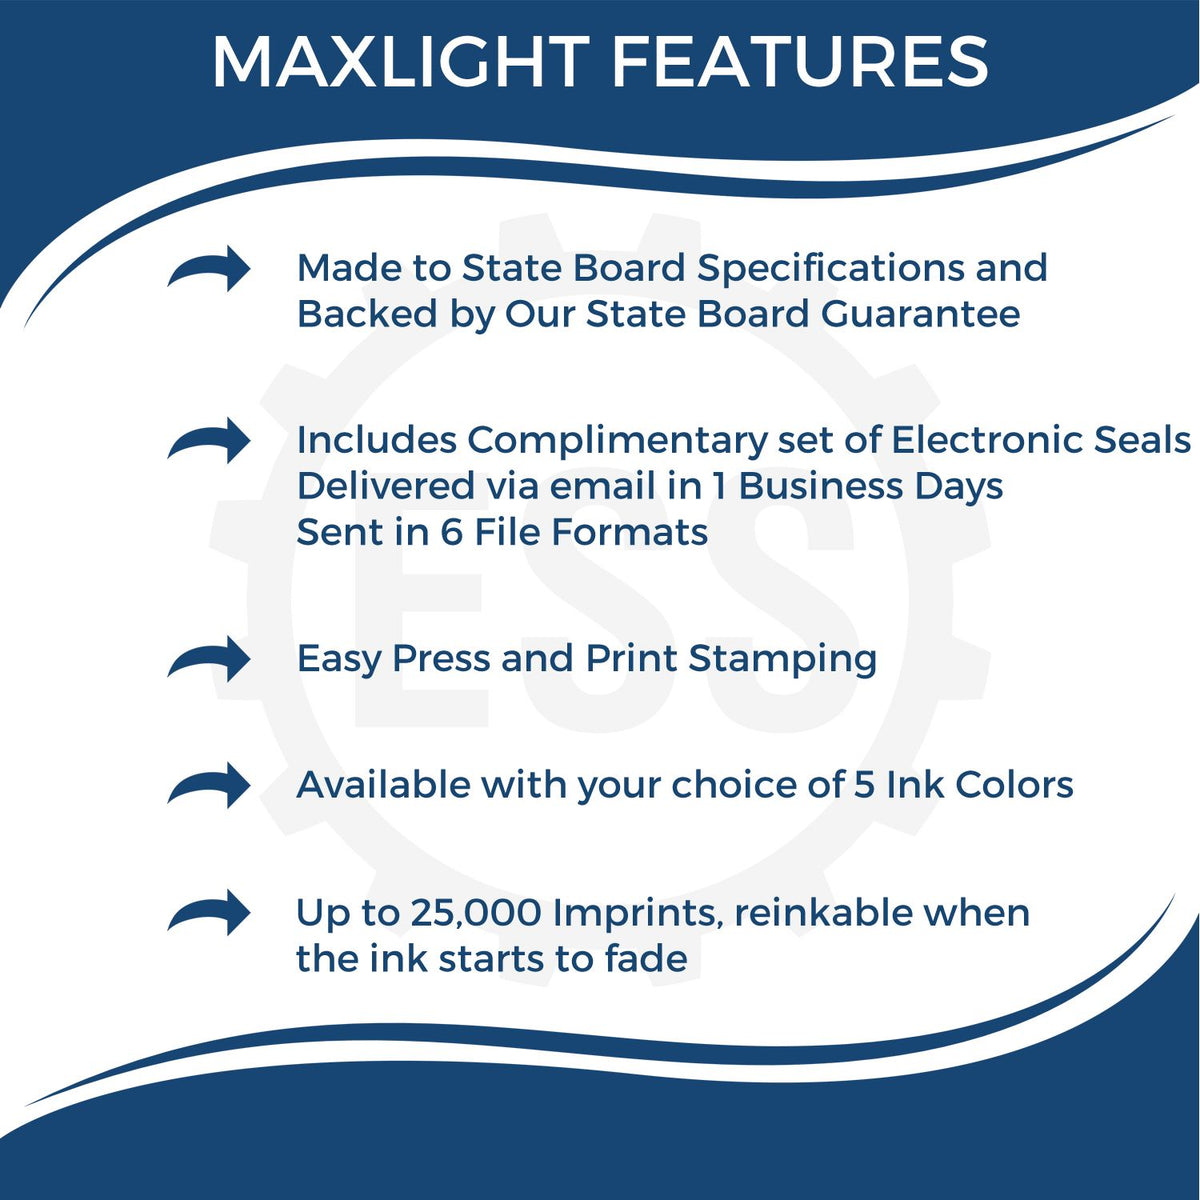 A picture of an infographic highlighting the selling points for the Premium MaxLight Pre-Inked Arizona Landscape Architectural Stamp